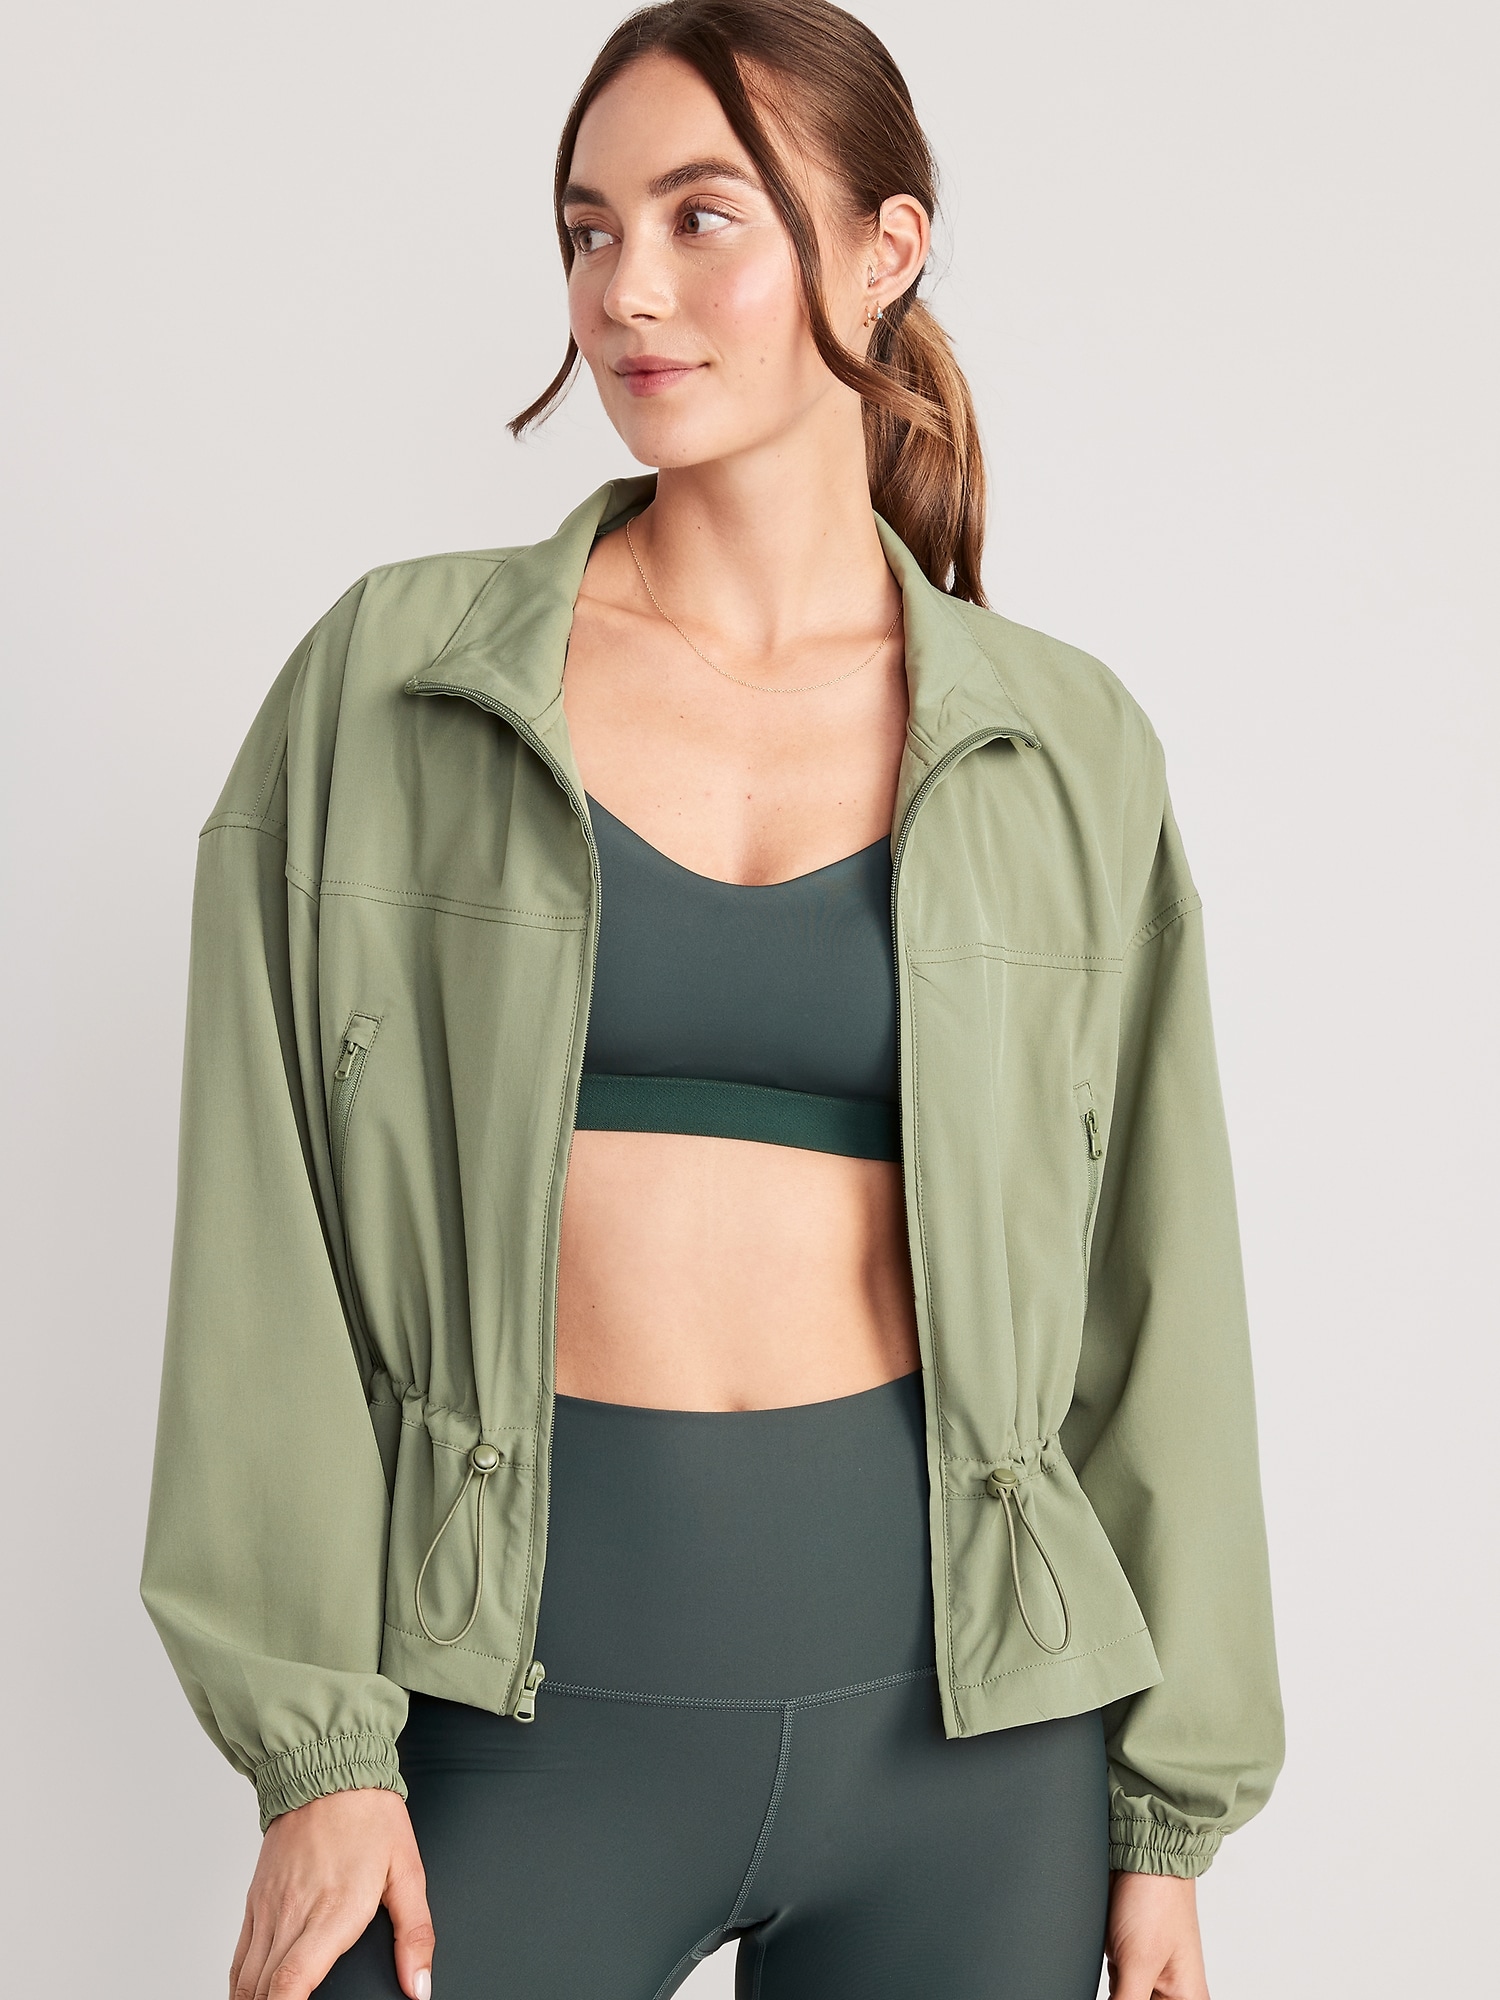 Old Navy Loose StretchTech Cinched-Waist Jacket for Women green. 1